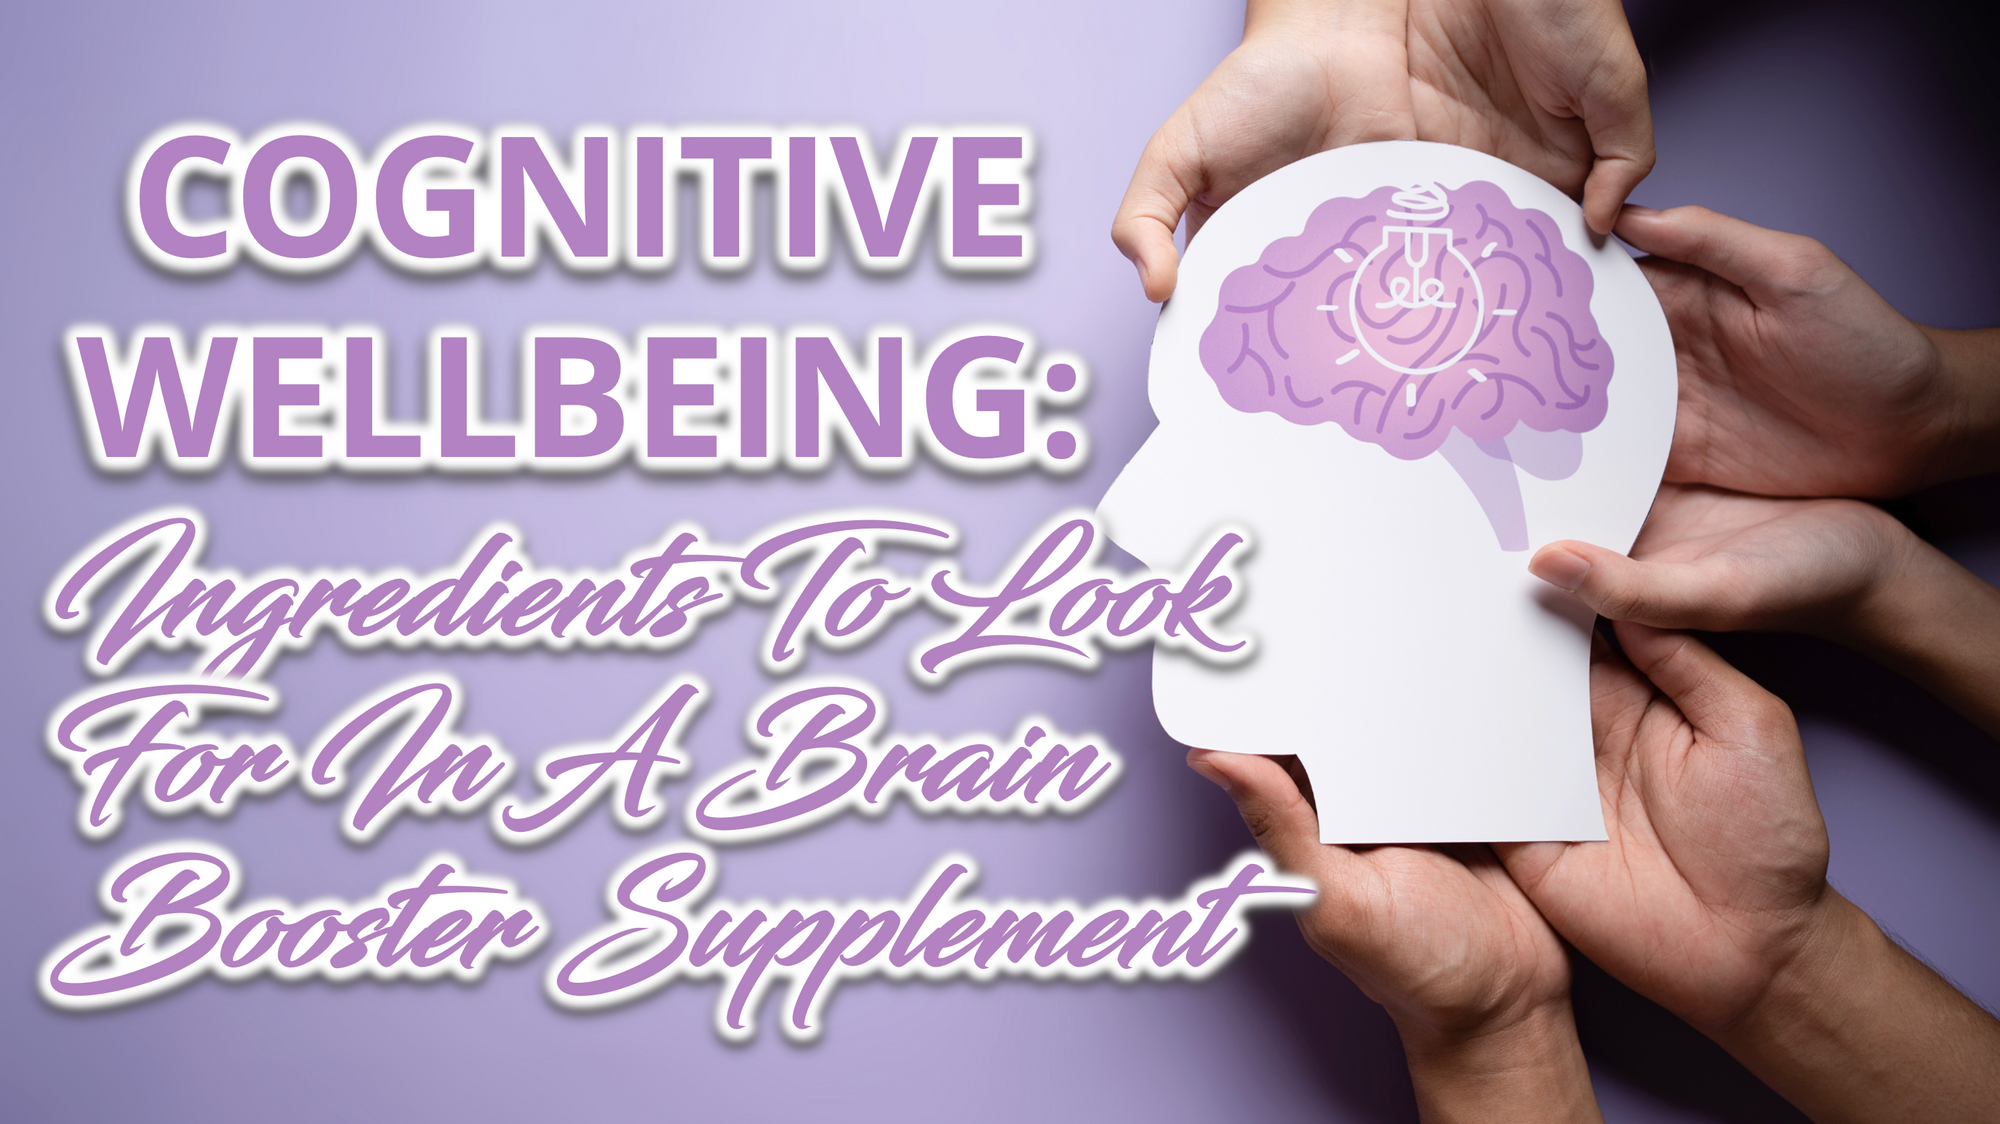 Hands holding a purple brain with the text Cognitive Wellbeing: Ingredients To Look For In A Brain Booster Supplement